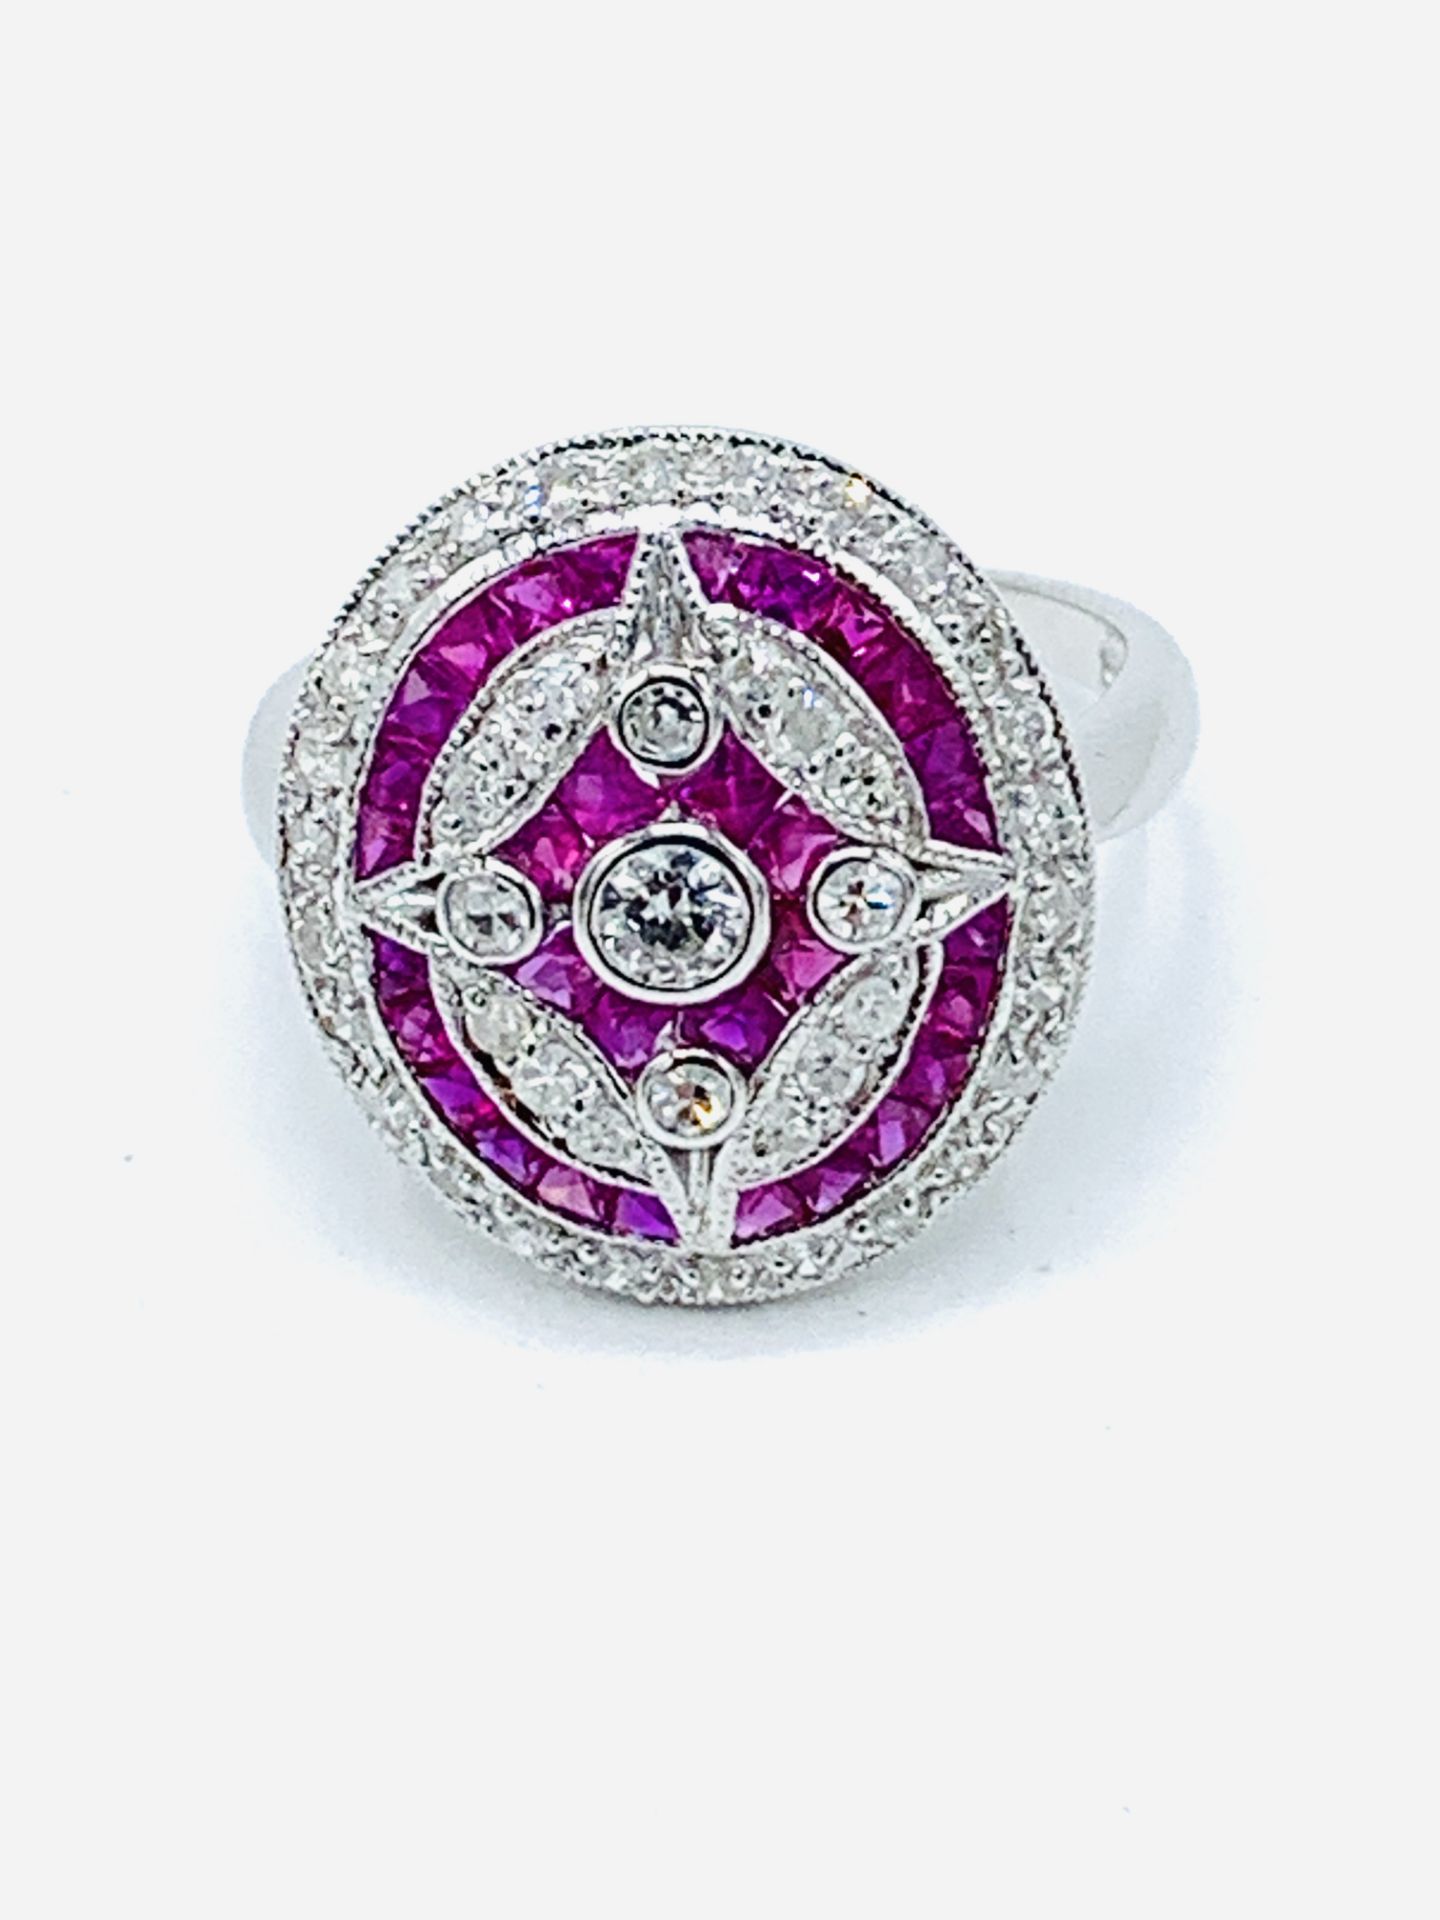 14ct white gold ruby and diamond target ring. - Image 3 of 5